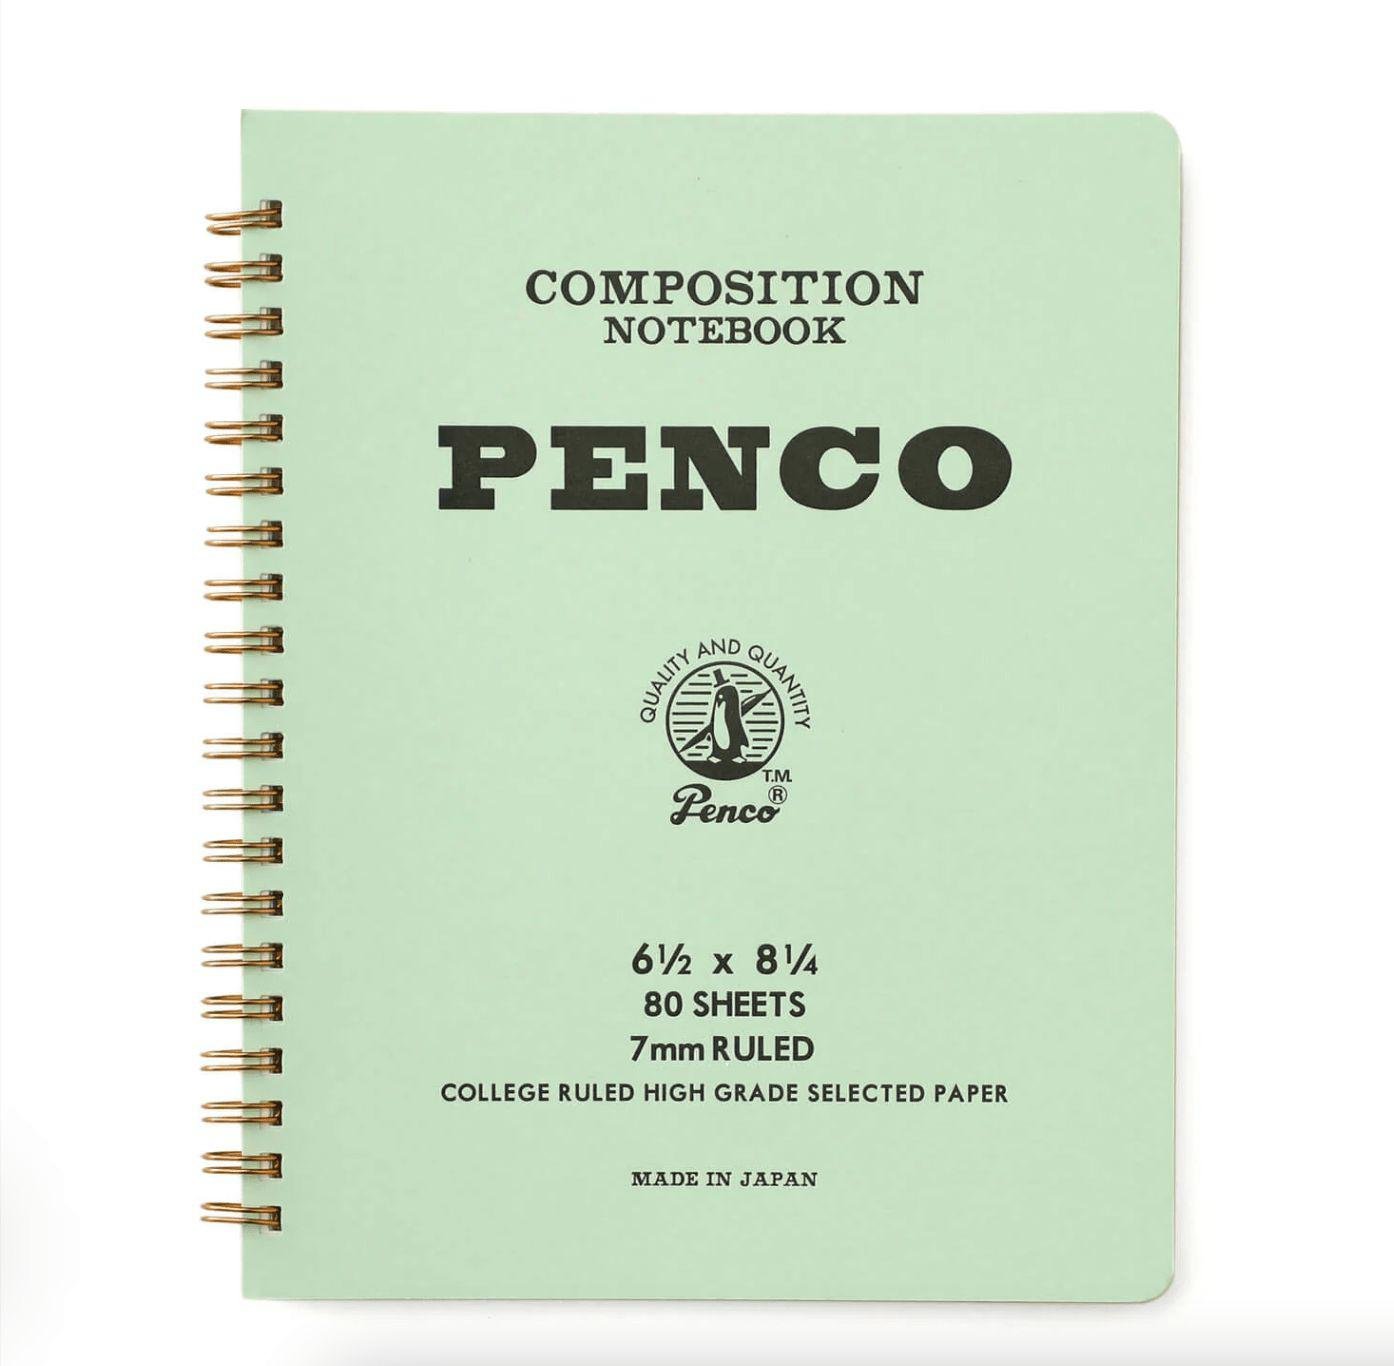 Green coiled Composition Notebook from PENCO. 6.5" x 8.25", 80 Sheets, 7mm Ruled, Made in Japan